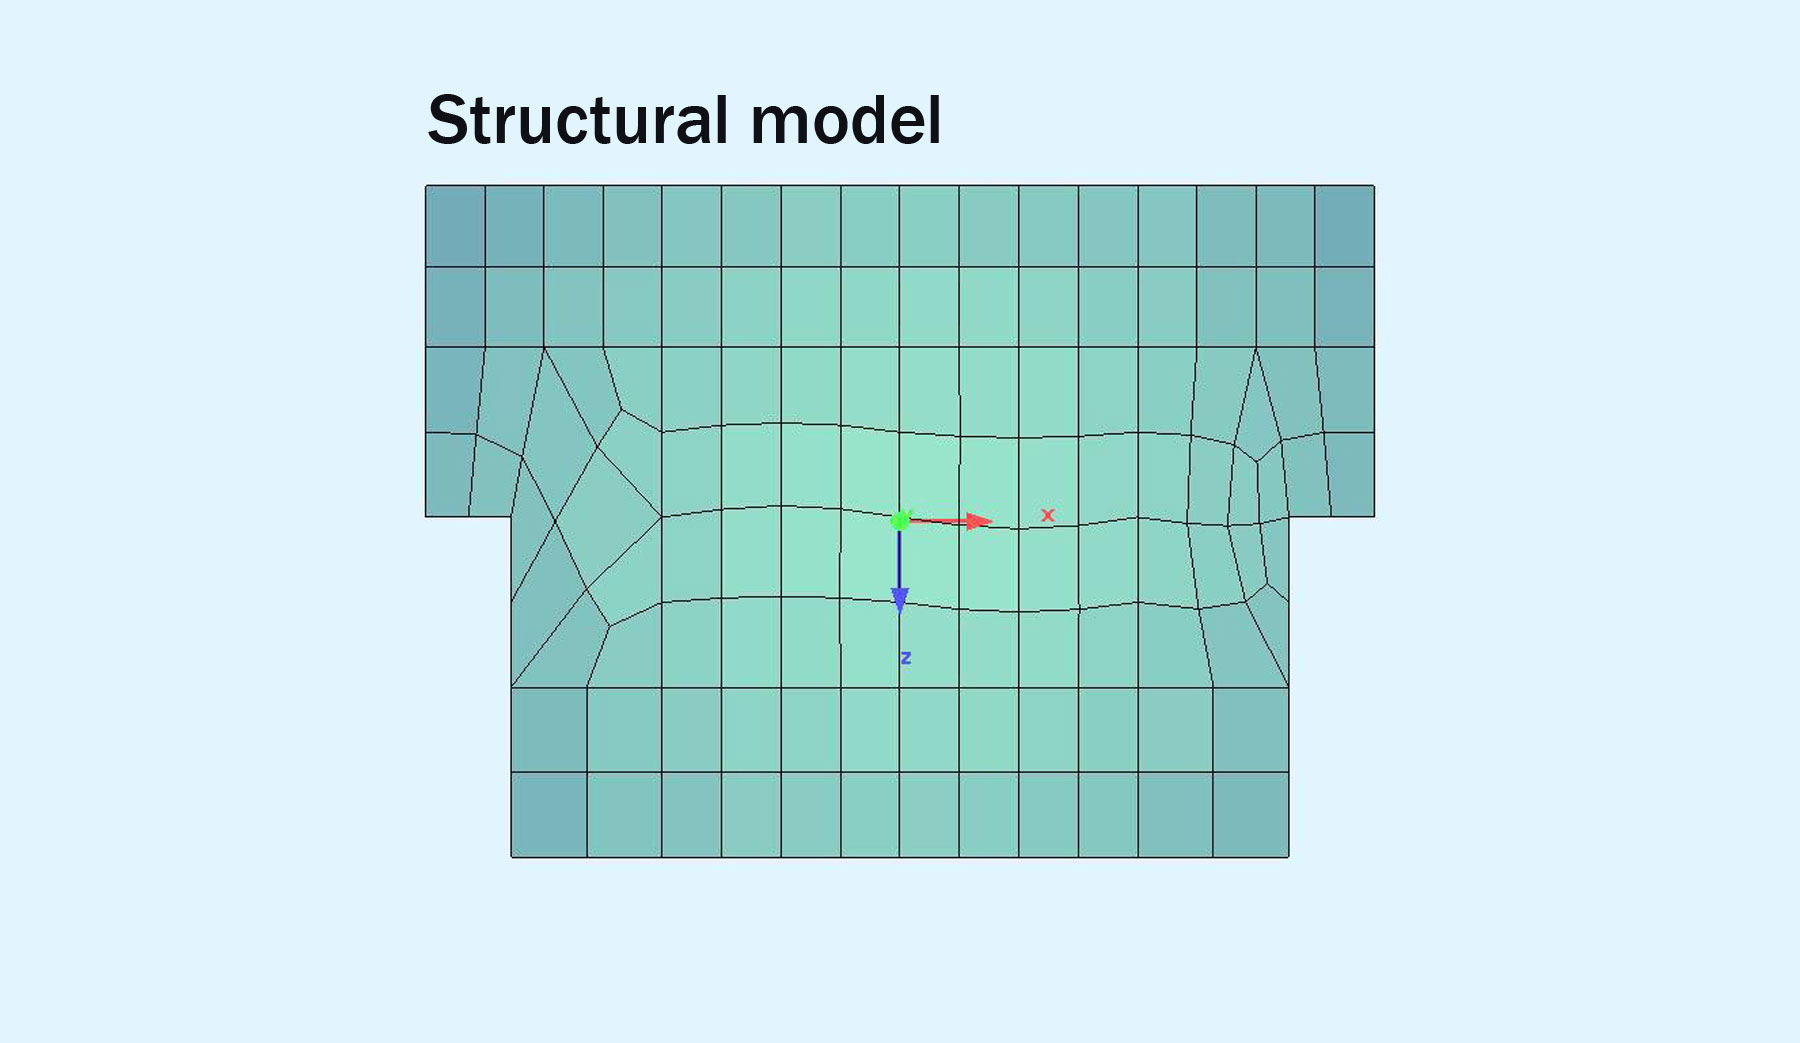 MSE WALL structural model design